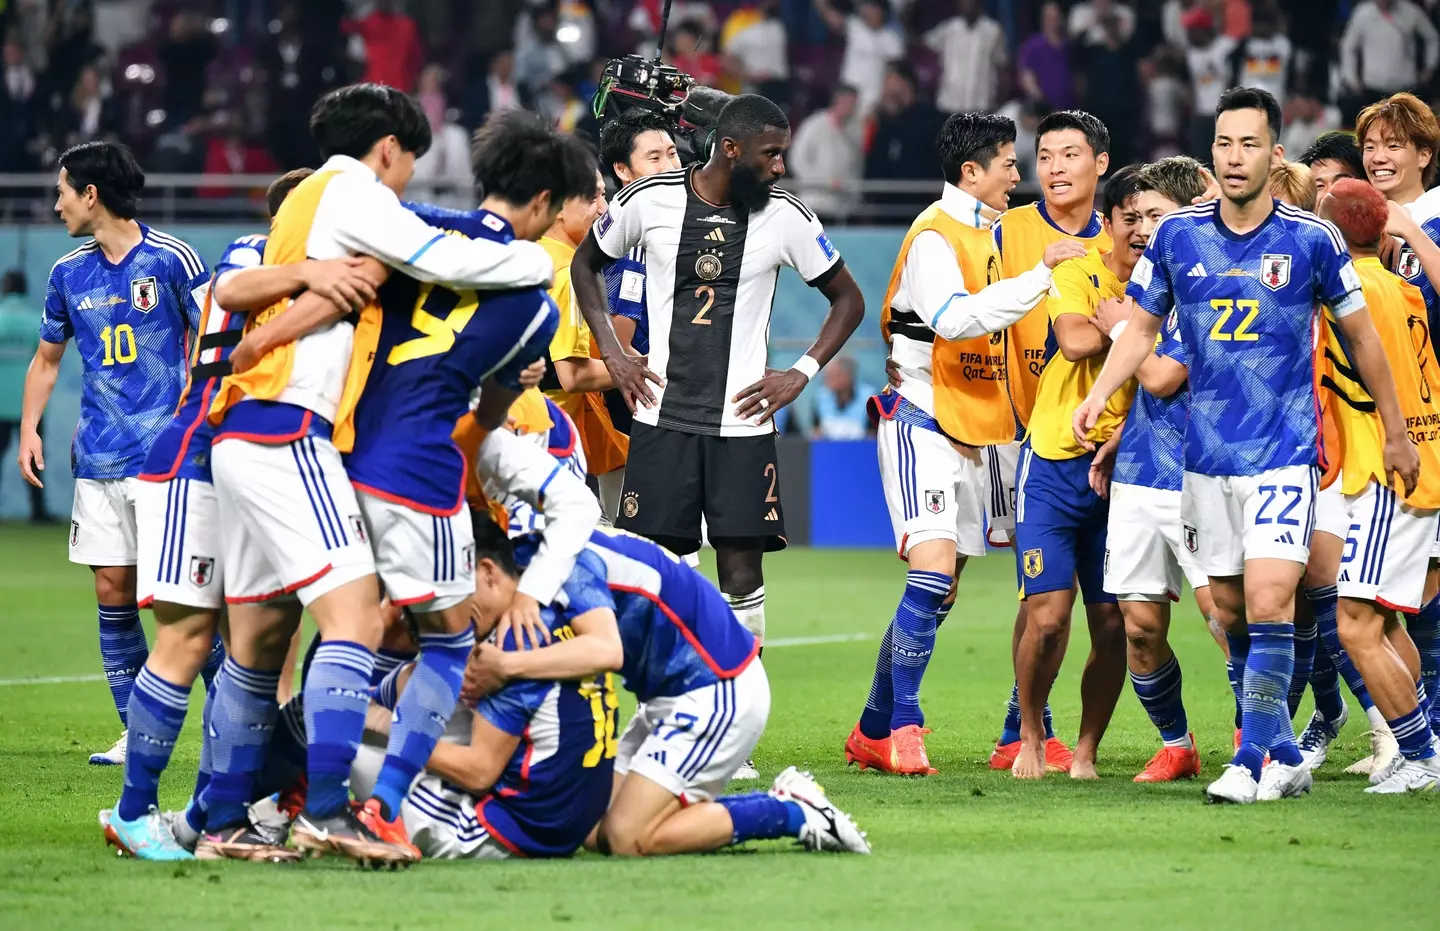 Japan players celebrate their win. (Image